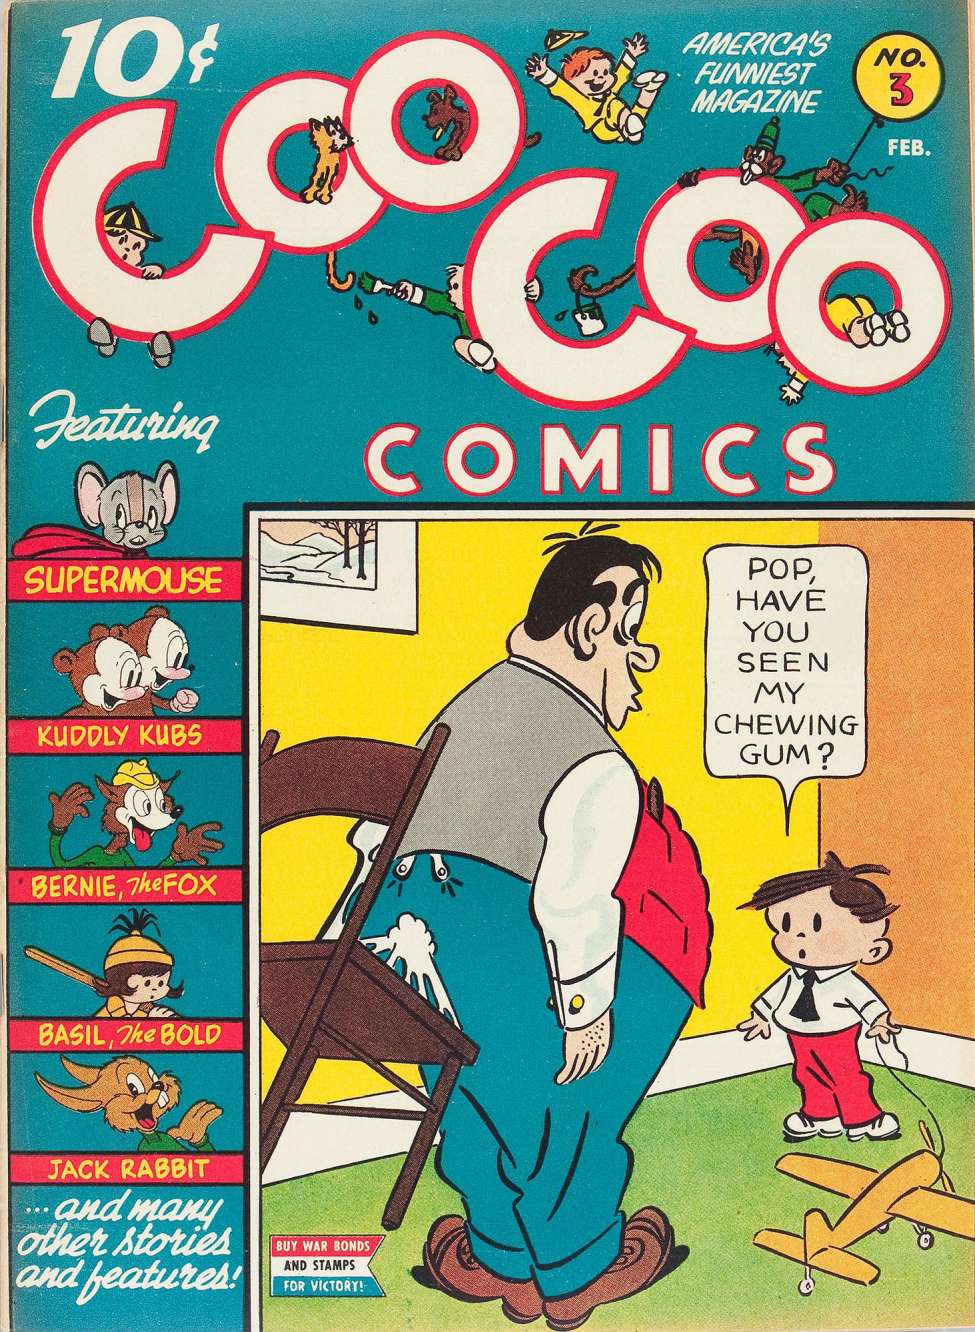 Book Cover For Coo Coo Comics 3